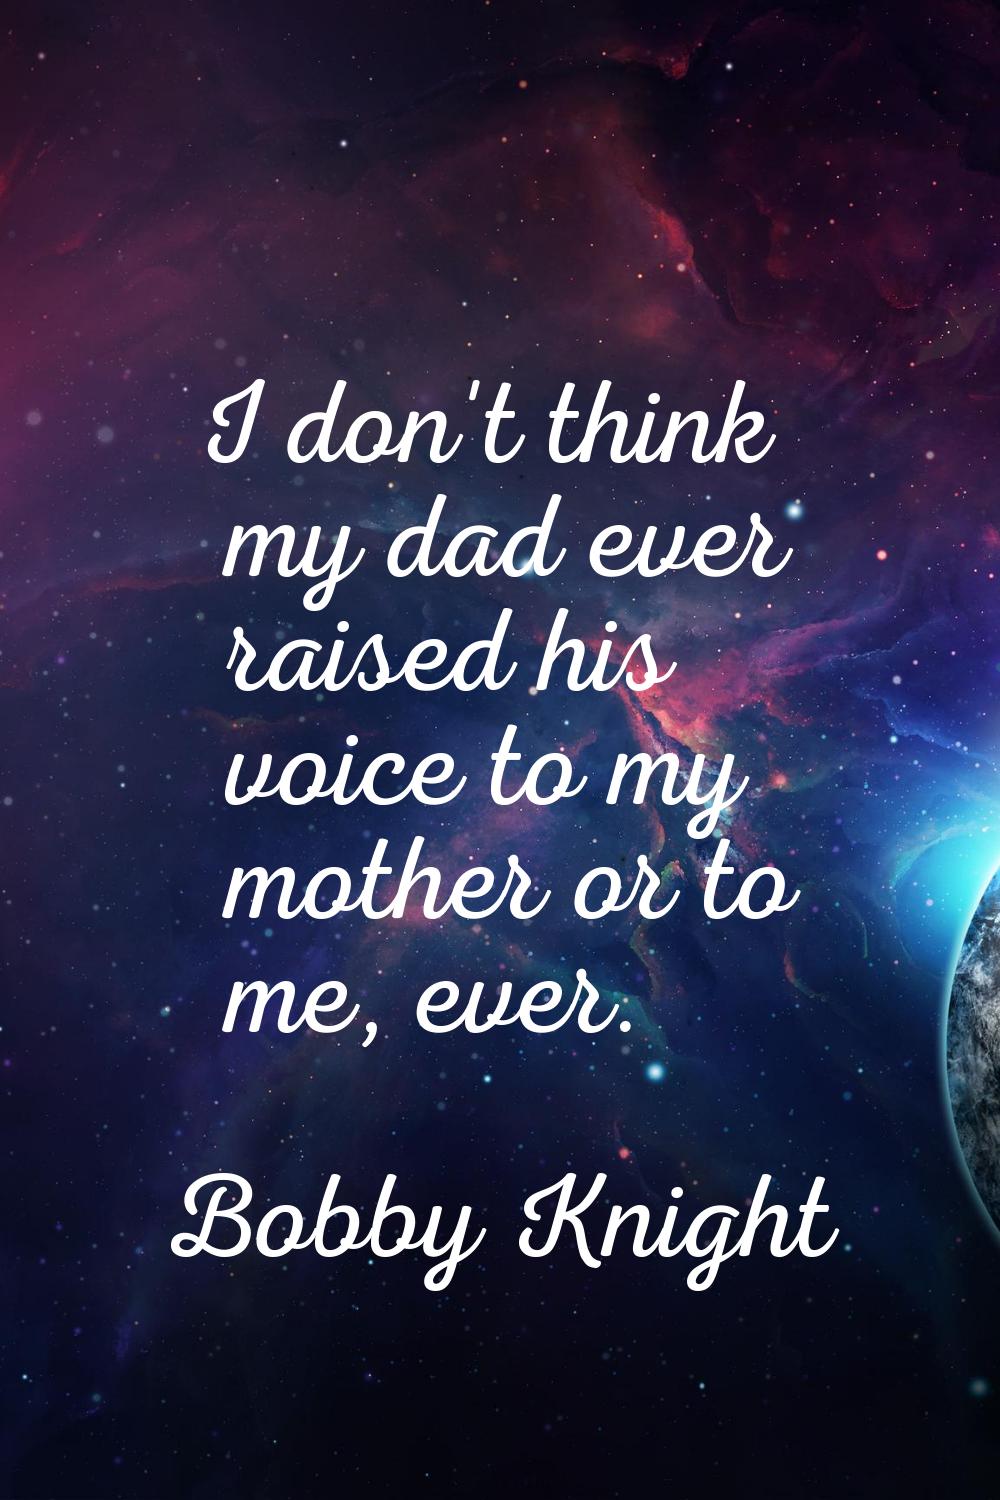 I don't think my dad ever raised his voice to my mother or to me, ever.